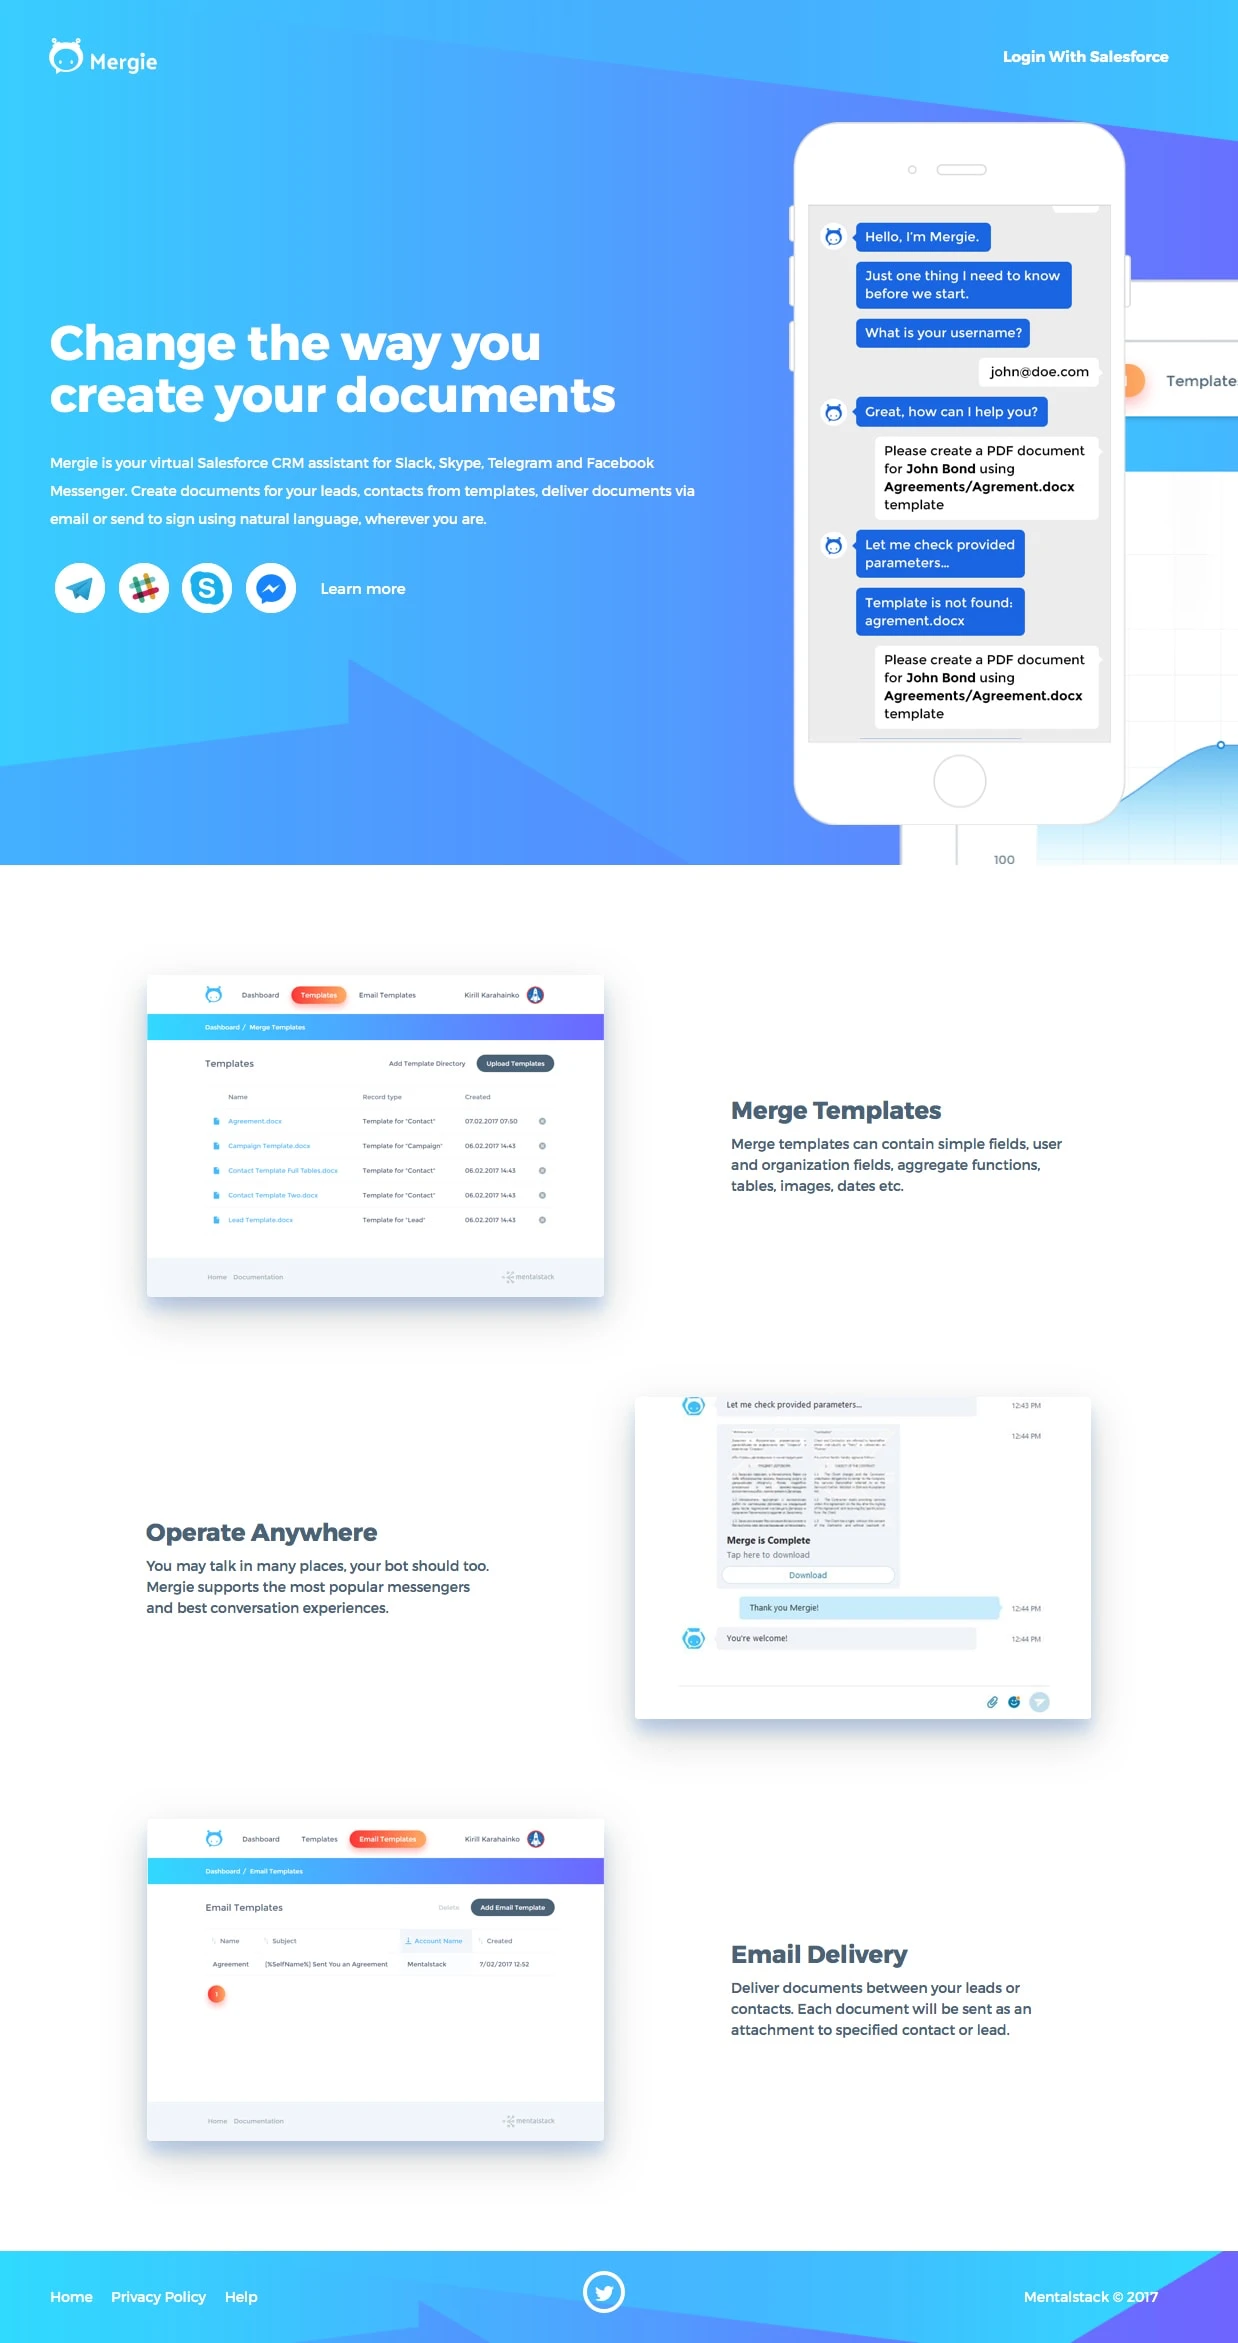 Mergie Landing Page Example: Mergie is your virtual Salesforce CRM assistant for Slack, Skype, Telegram and Facebook Messenger. Create documents for your leads, contacts from templates, deliver documents via email or send to sign using natural language, wherever you are.